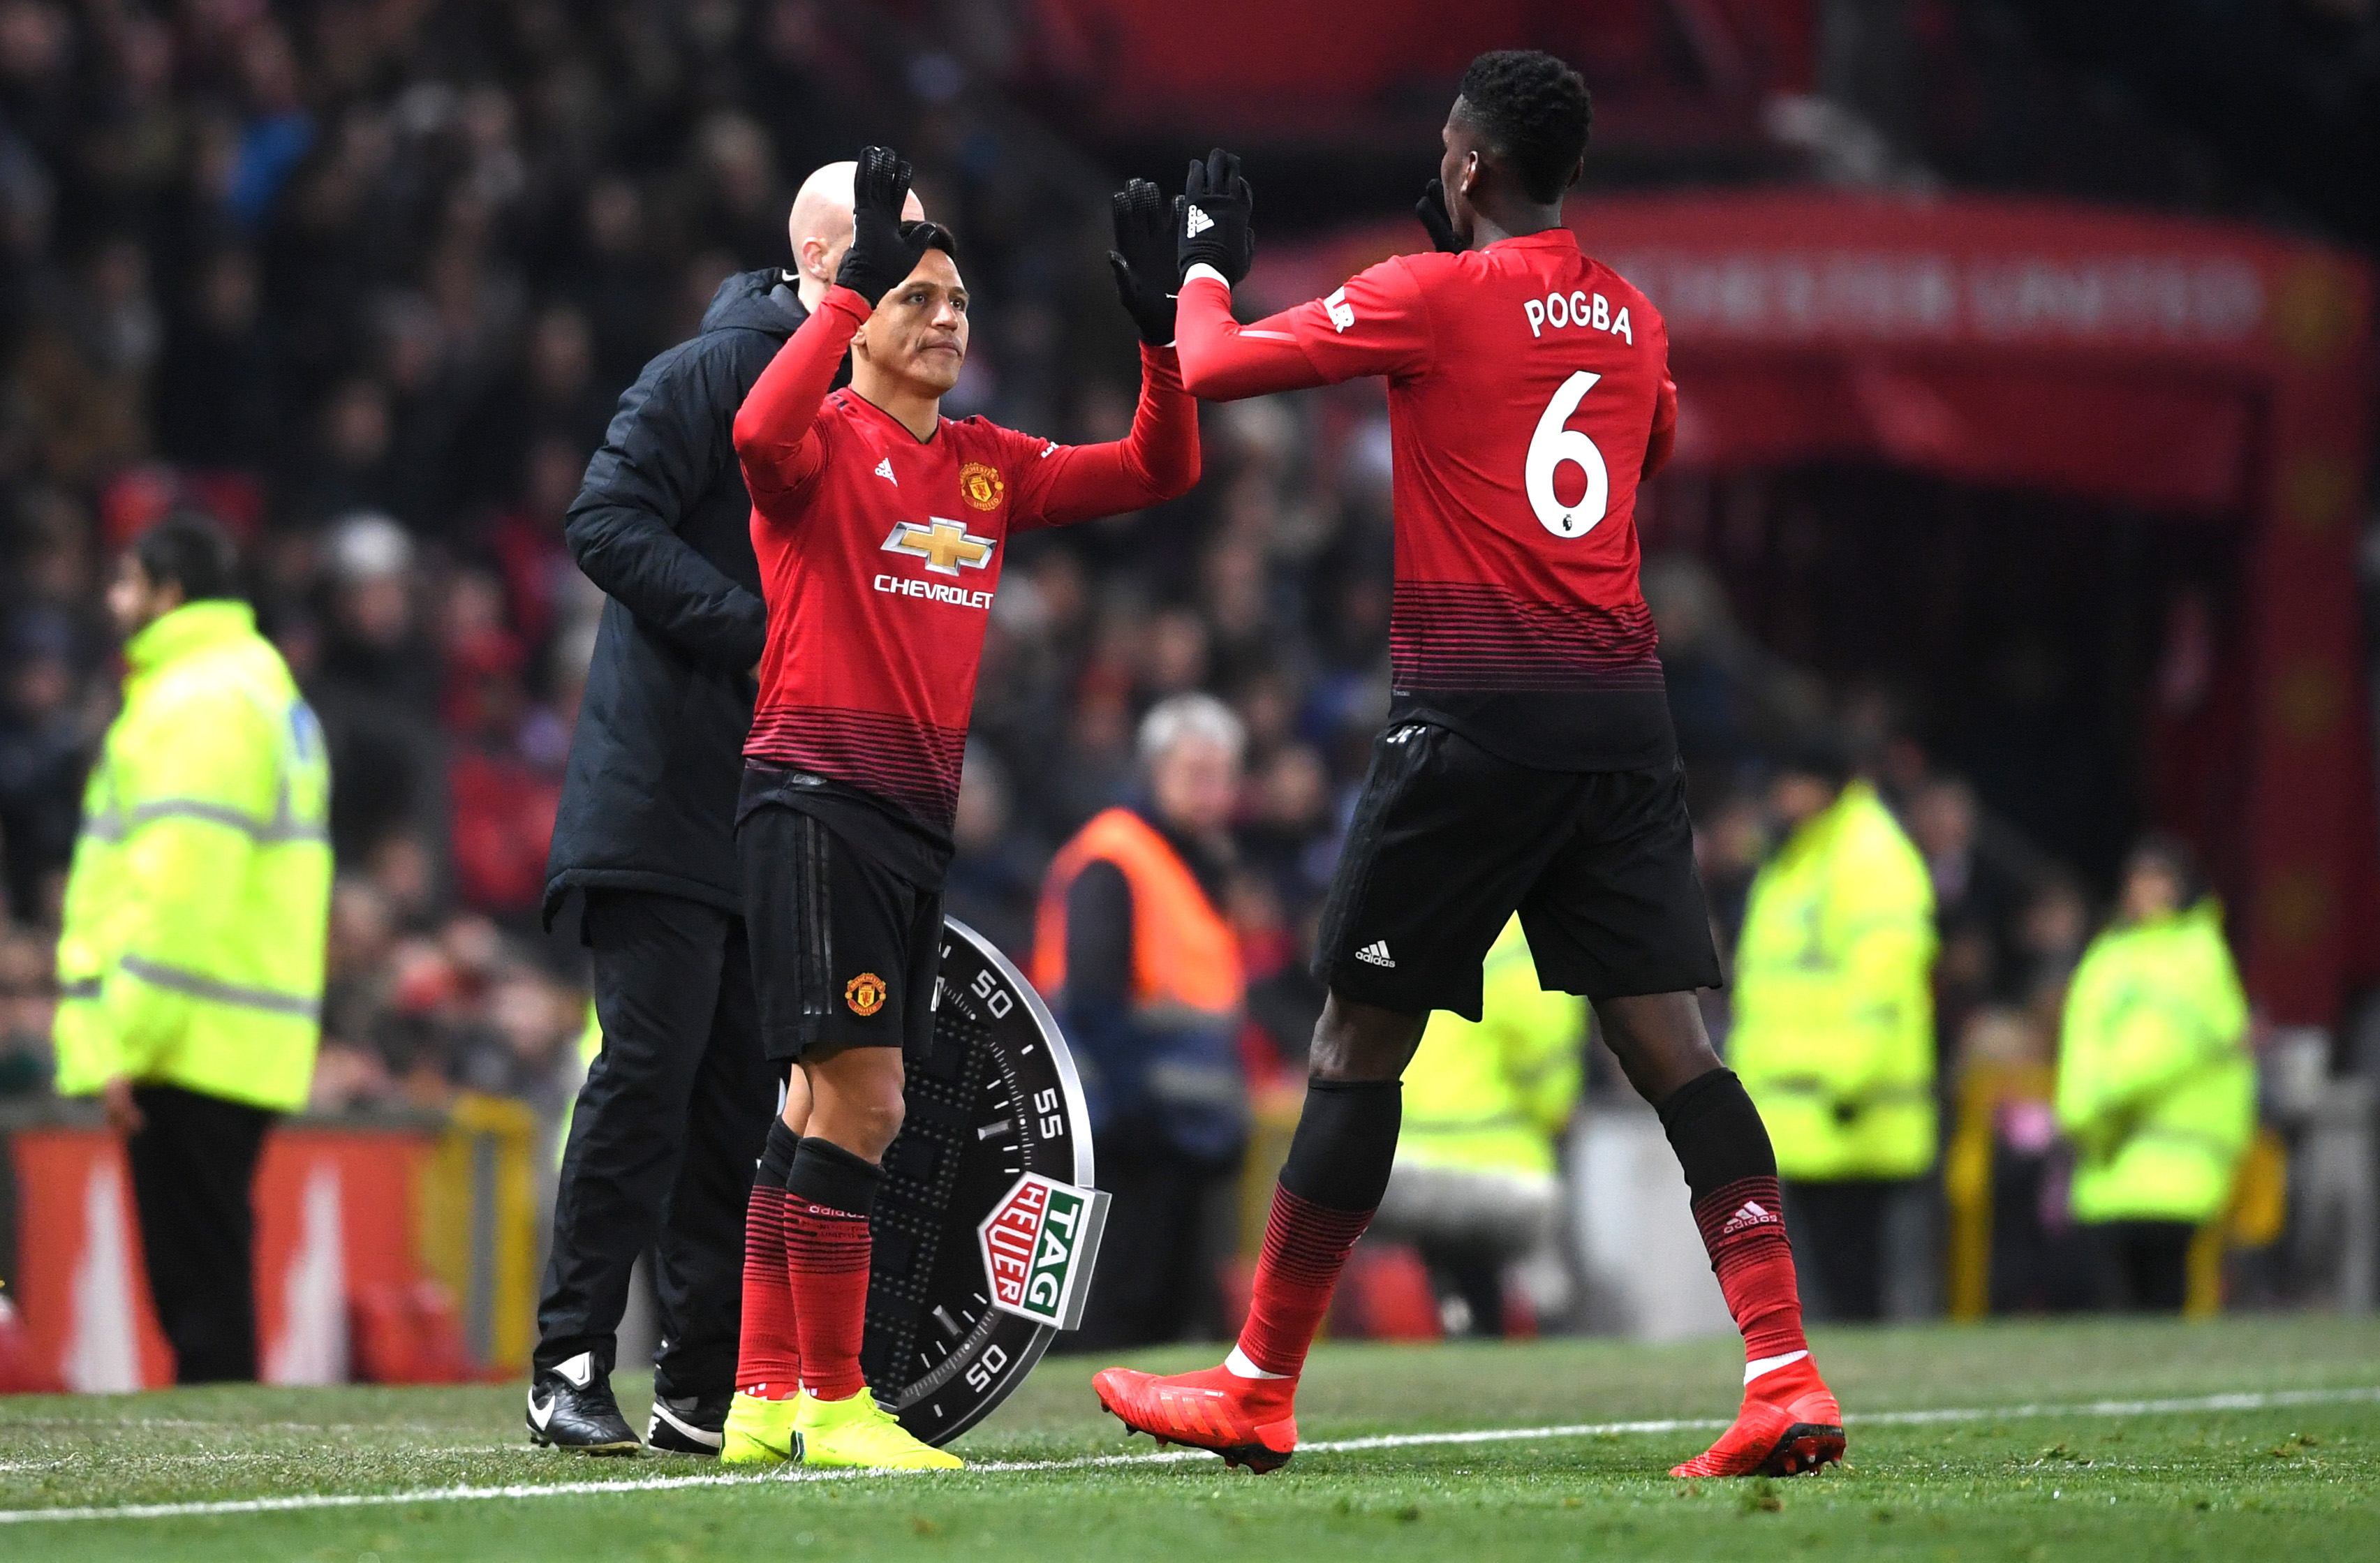 MANCHESTER, ENGLAND - NOVEMBER 24:  Paul Pogba is substituted and replaced by Alexis Sanchez of Manchester United during the Premier League match between Manchester United and Crystal Palace at Old Trafford on November 24, 2018 in Manchester, United Kingdom.  (Photo by Laurence Griffiths/Getty Images)